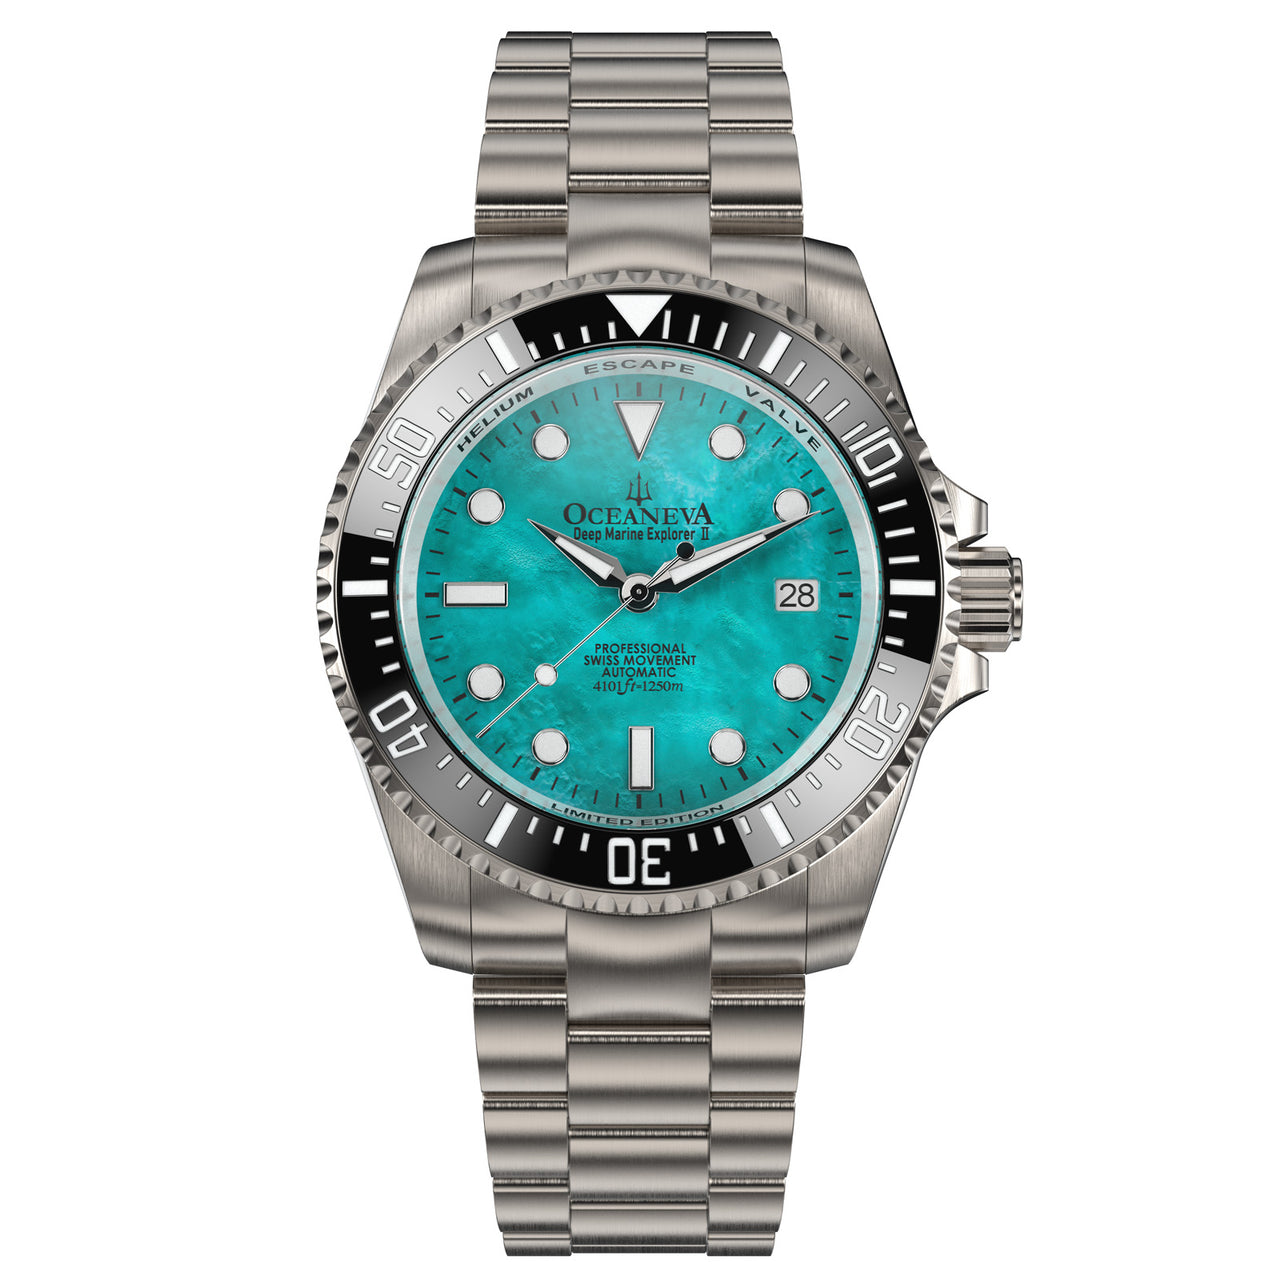 The Watch Inspired By Aquamarine – Oceaneva Extraordinary Dive Watches